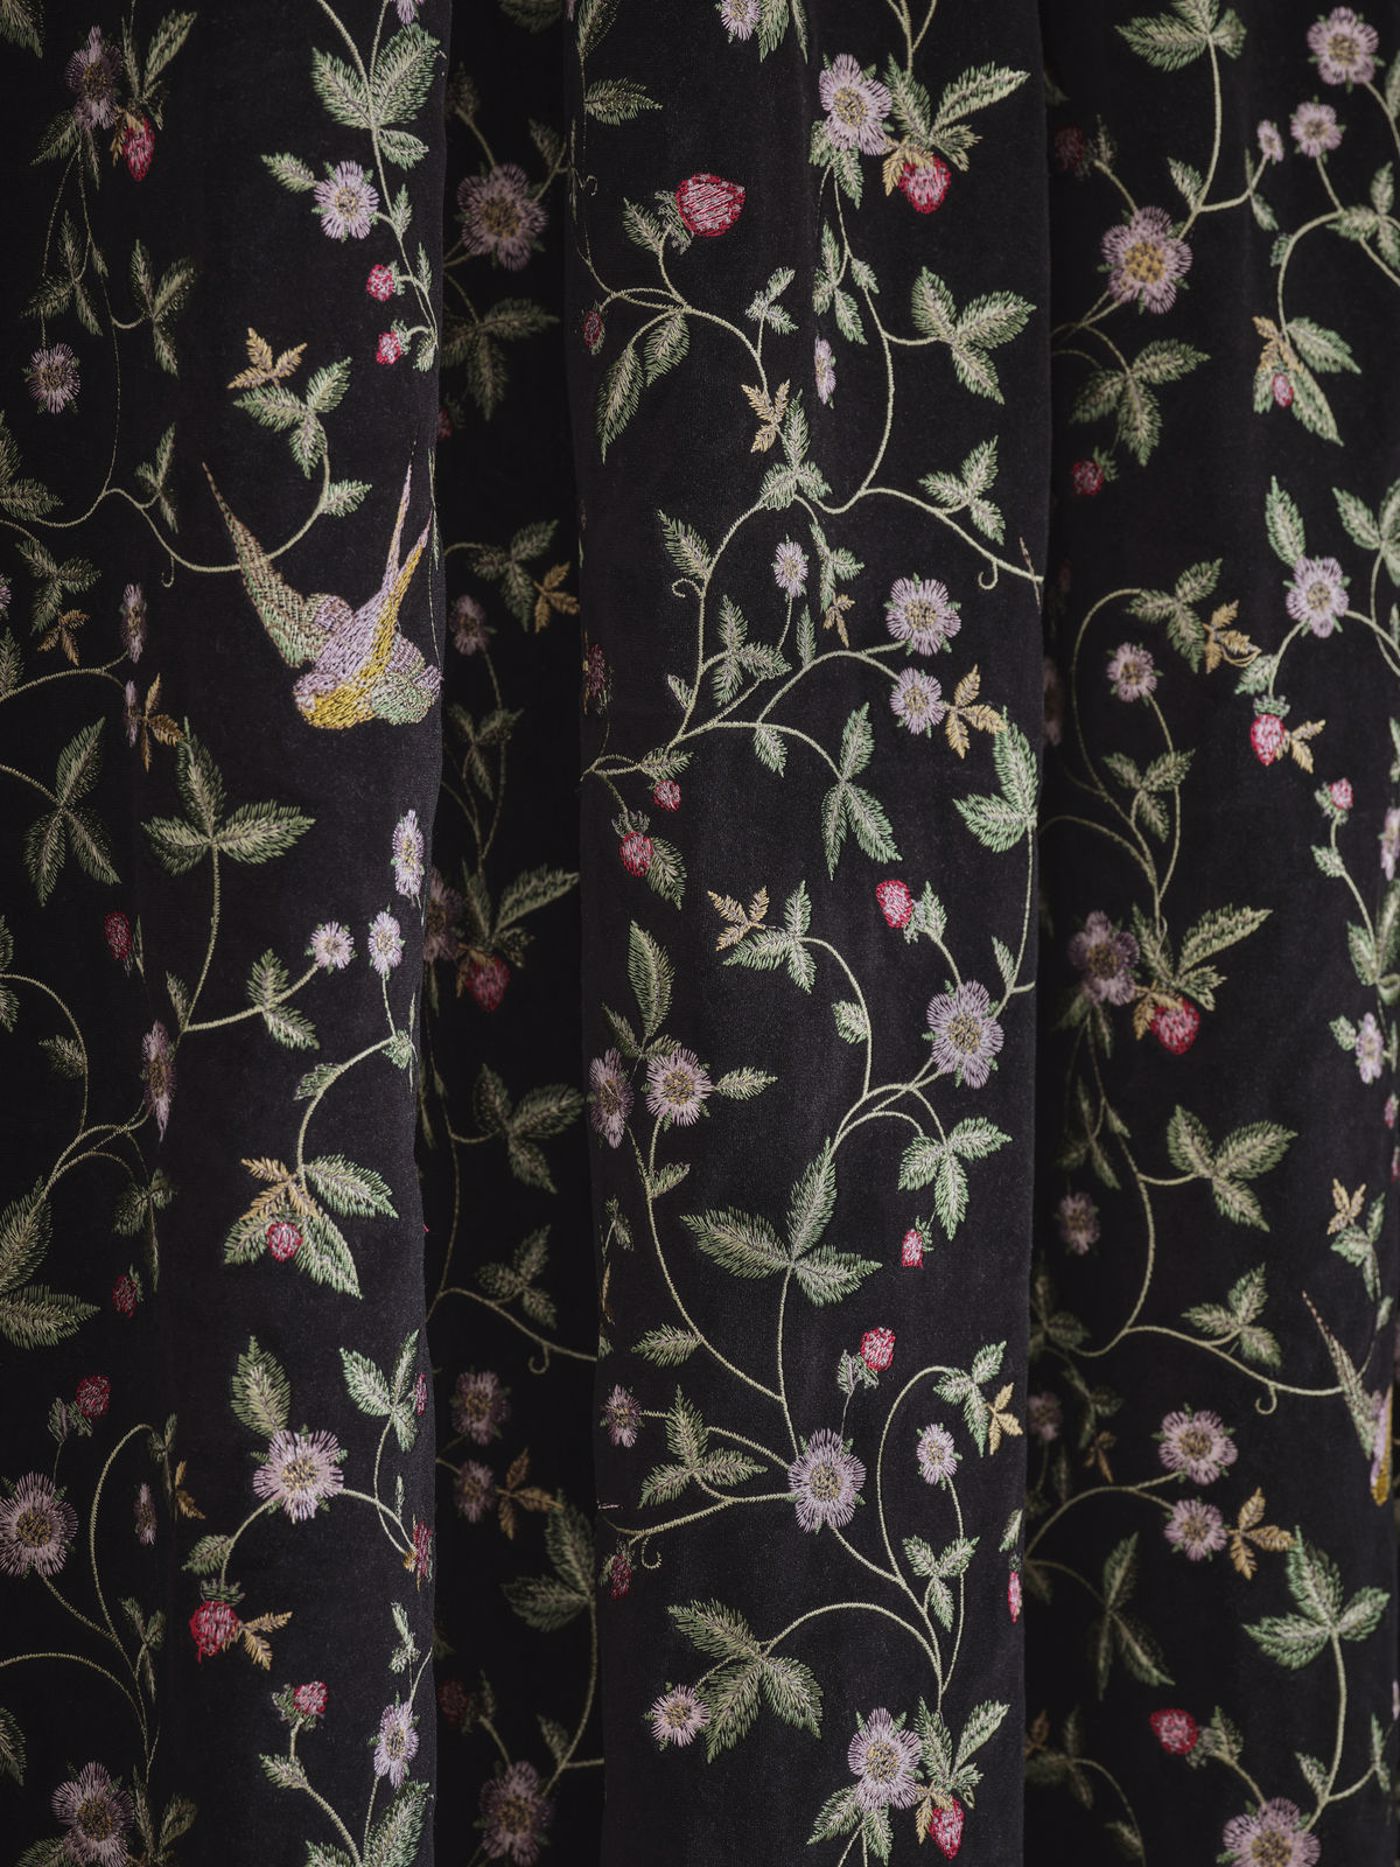 Wild Strawberry Noir Embroidery Fabric by CNC